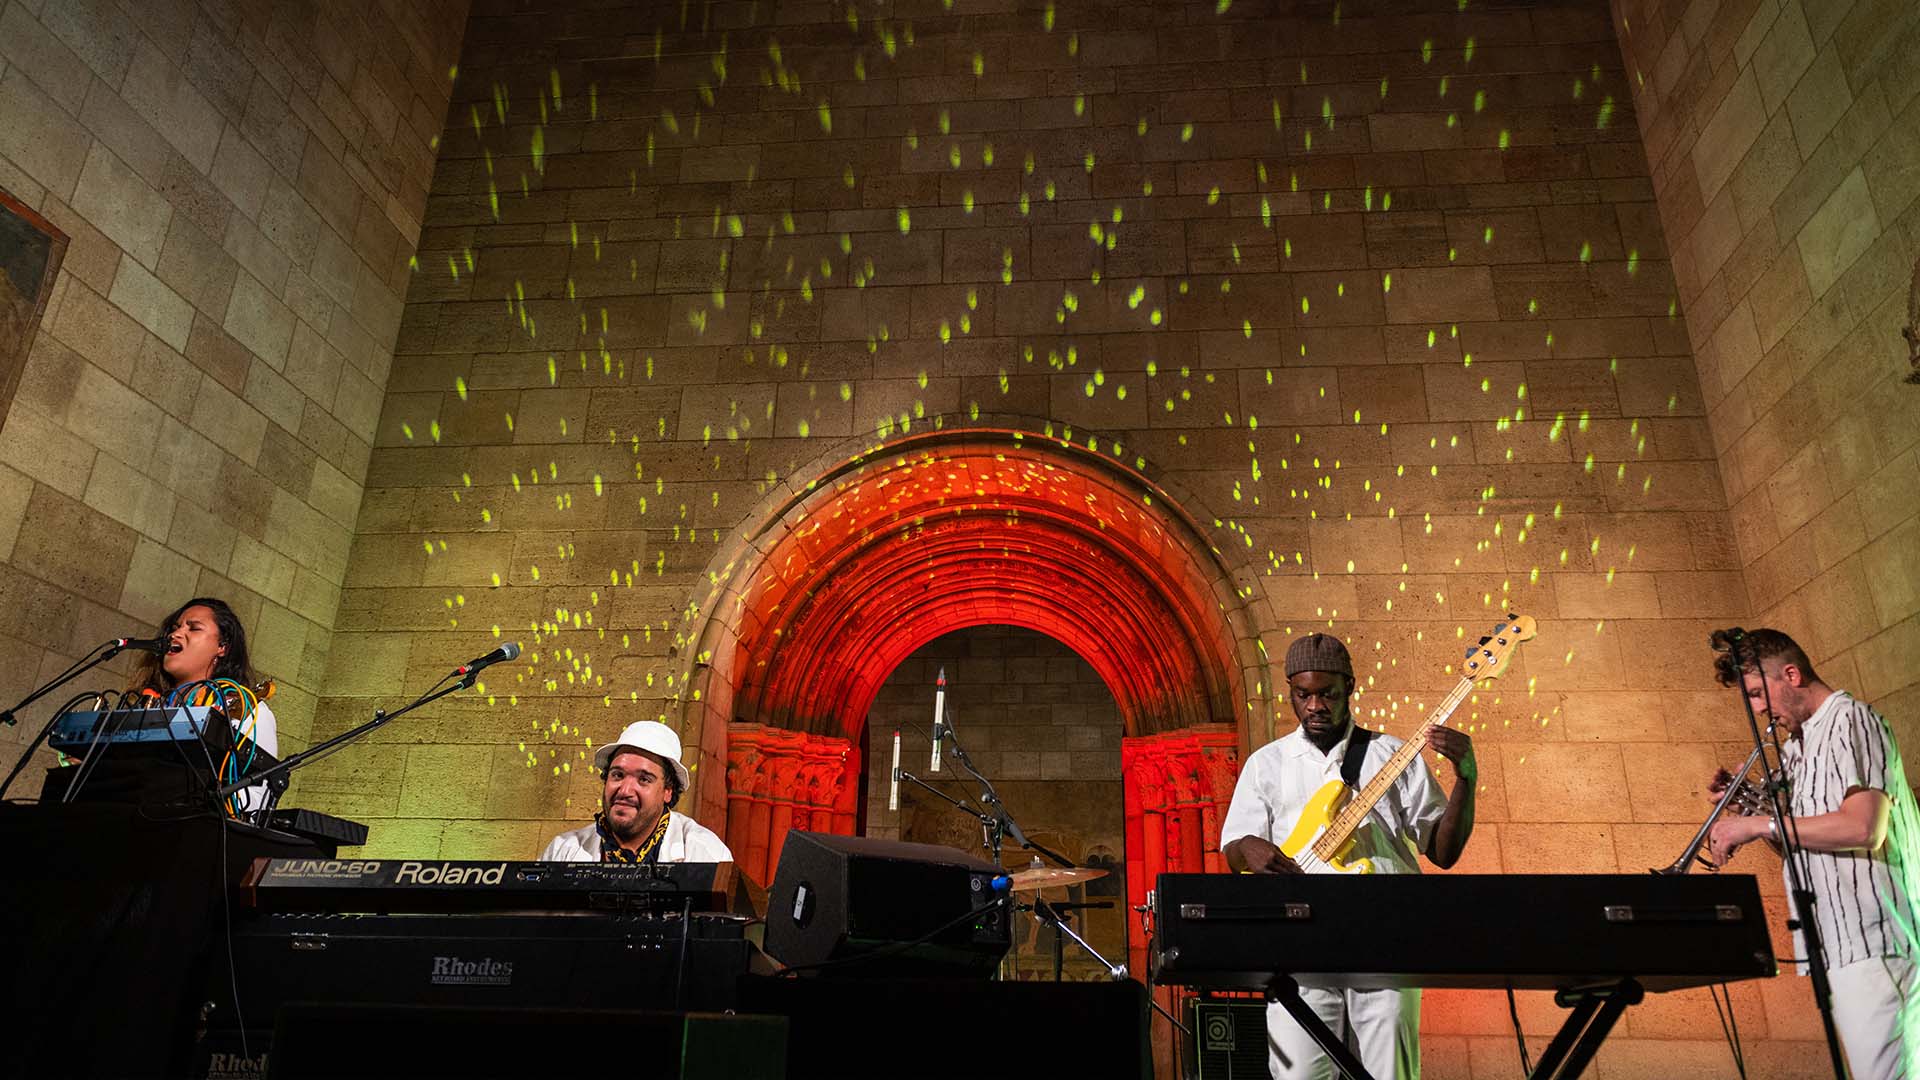 Four musicians performing at a live concert in front of an arched wall lit up with red and yellow lights.